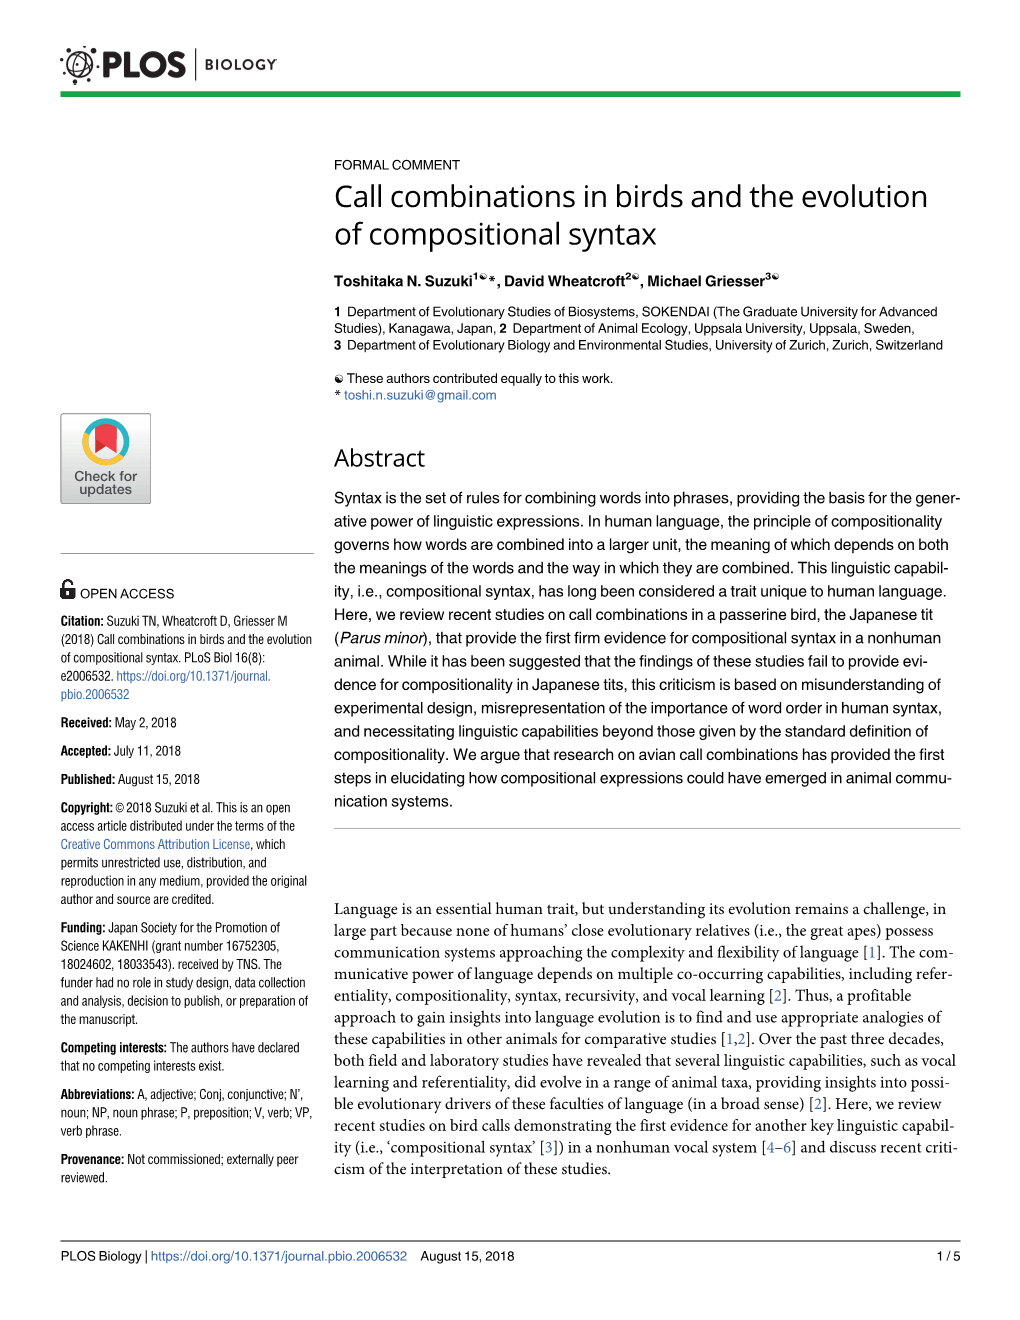 Call Combinations in Birds and the Evolution of Compositional Syntax